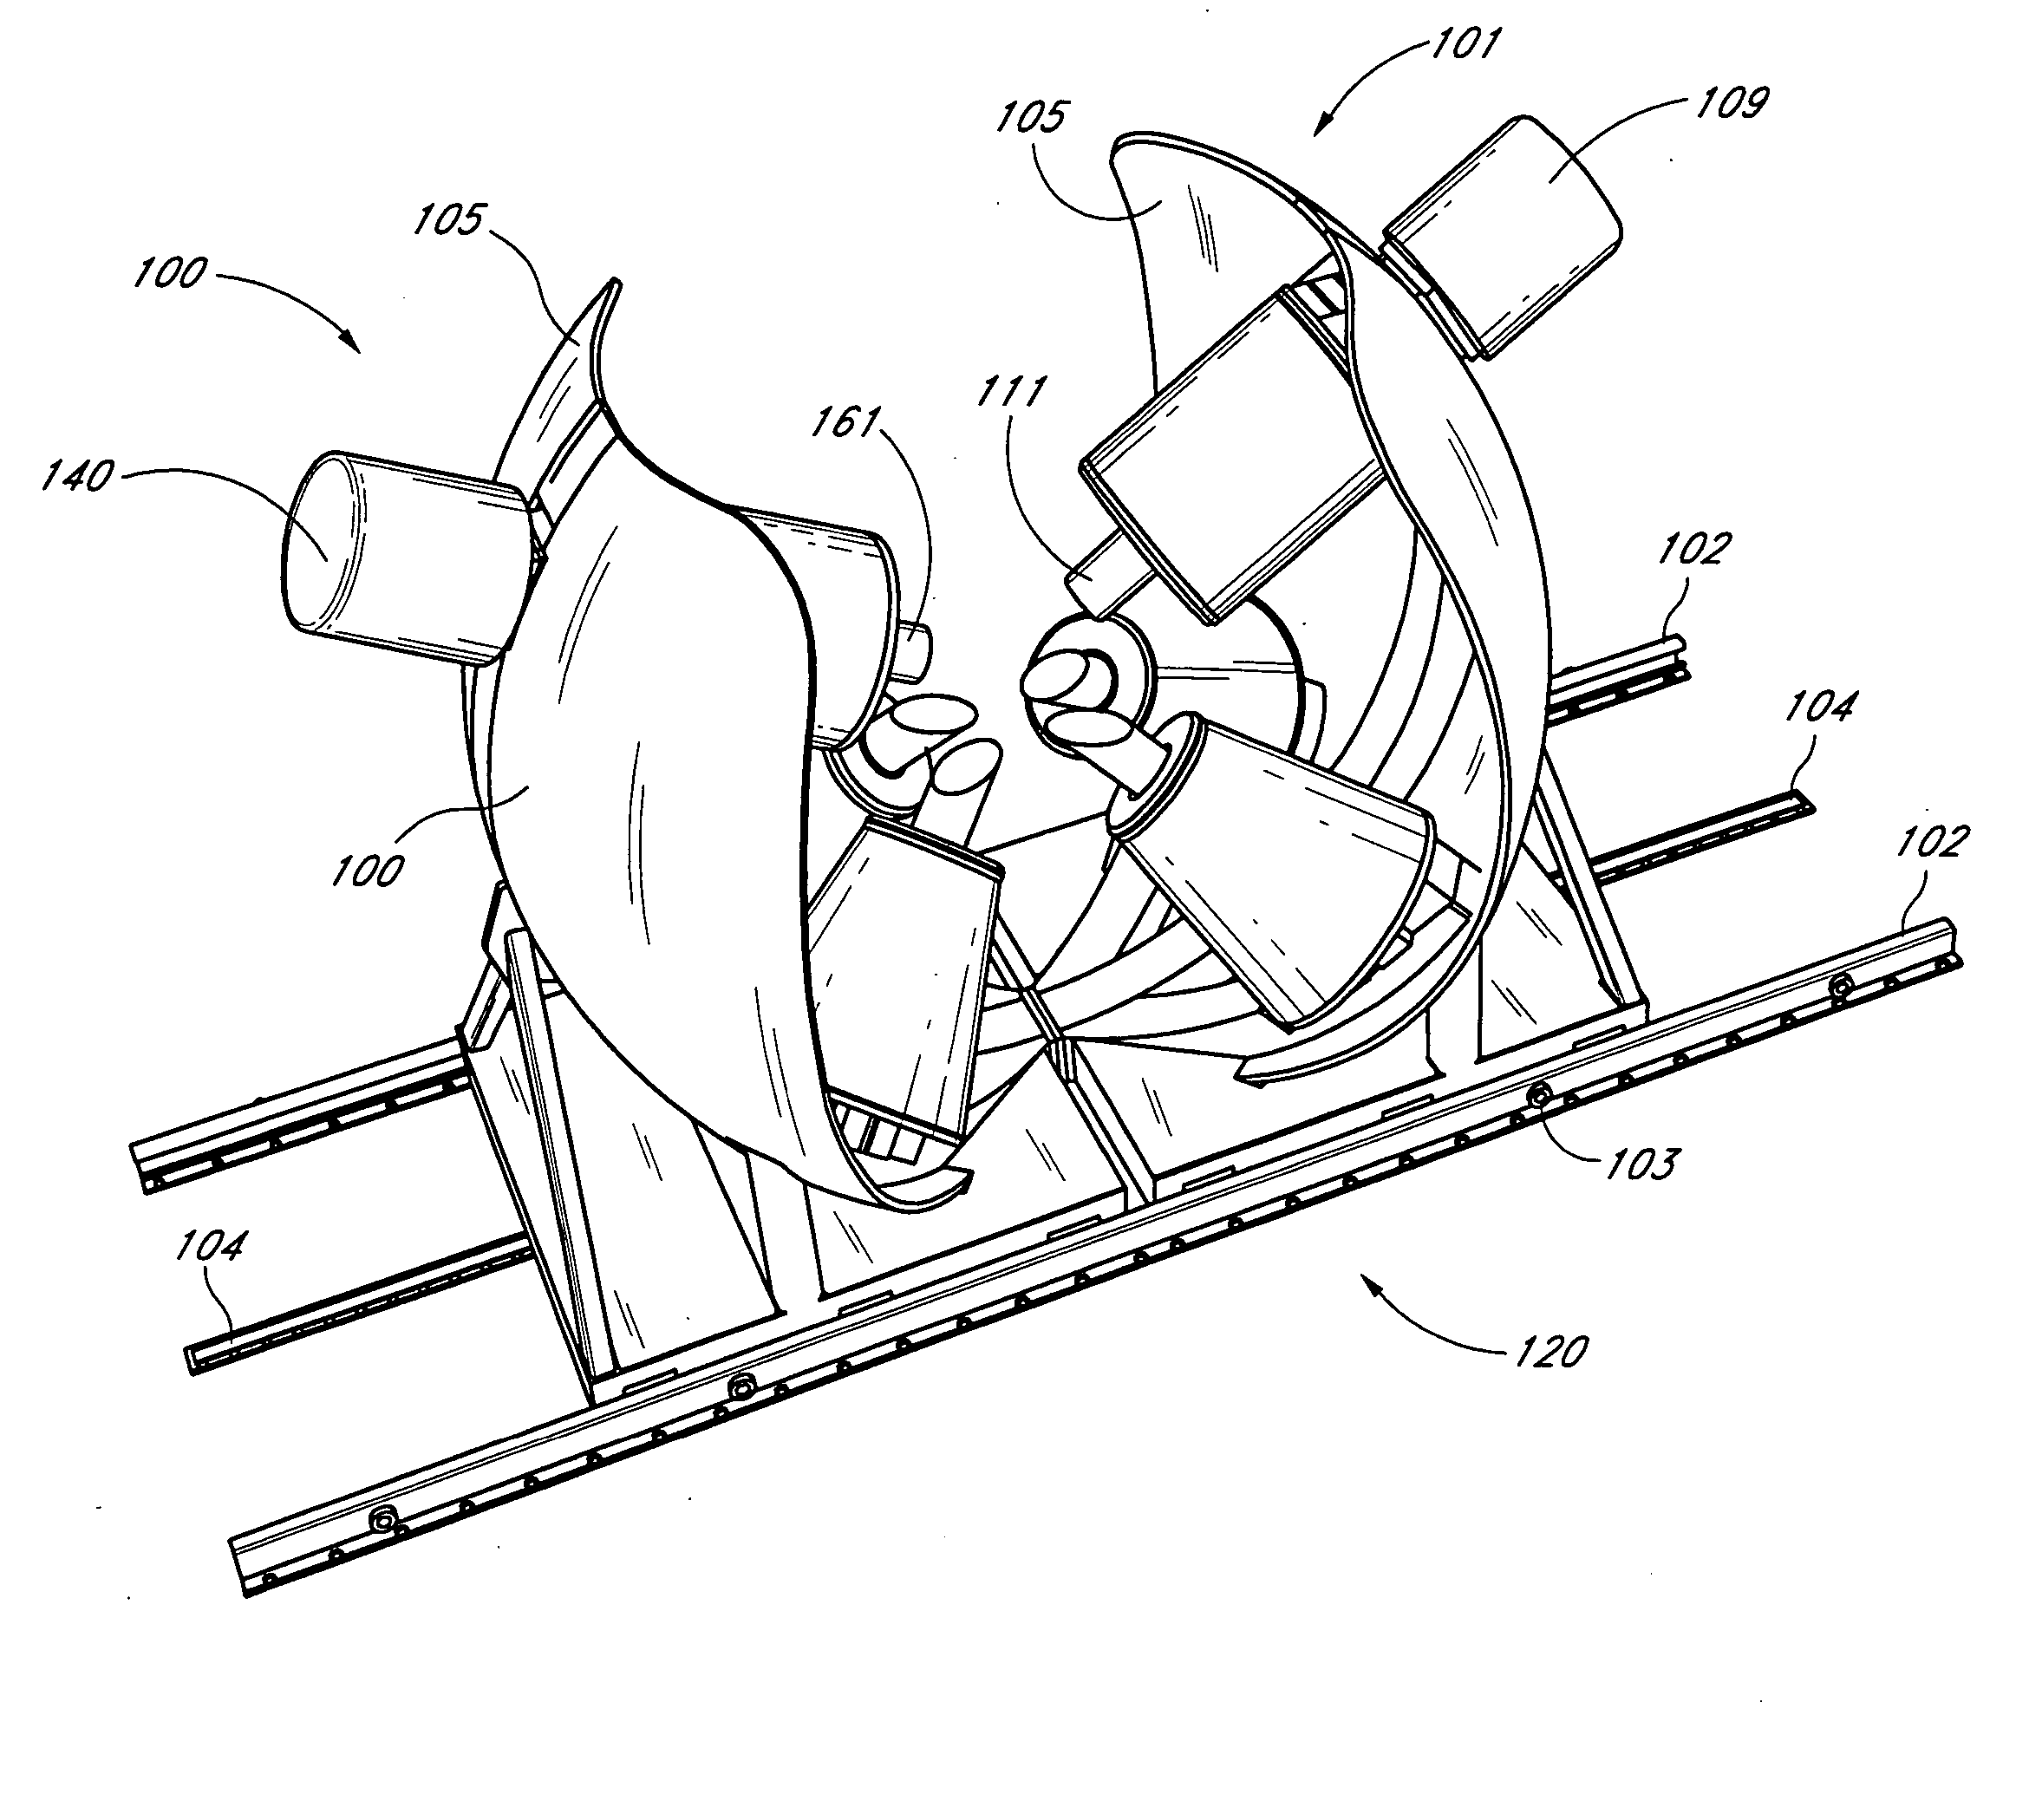 Apparatus and method for shaped magnetic field control for catheter, guidance, control, and imaging